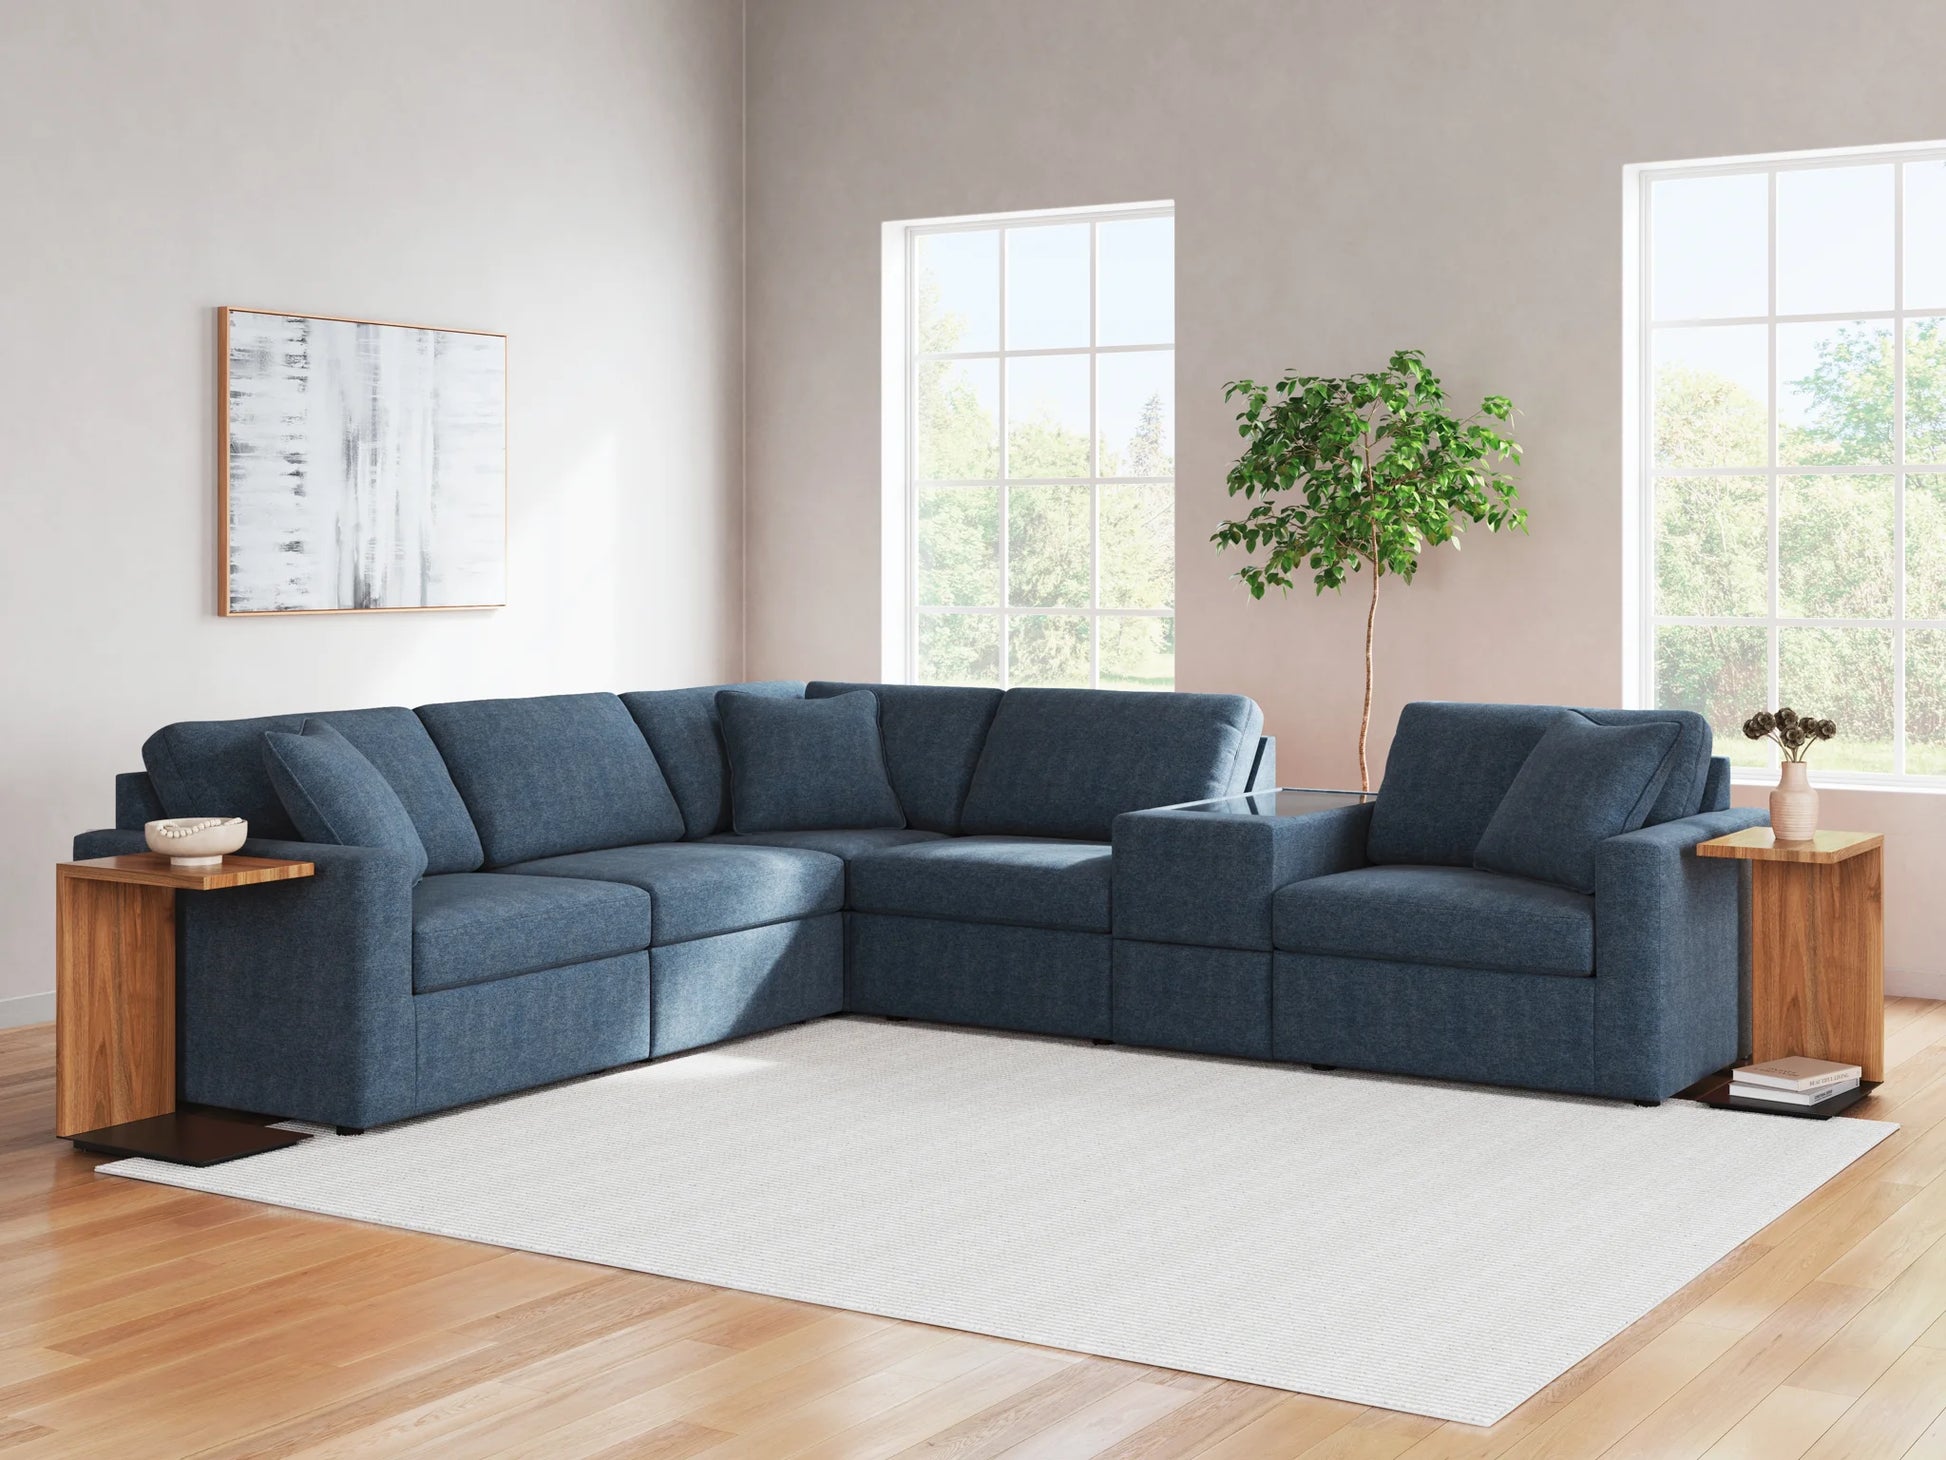 Modmax - Ink - 6-Piece Sectional With Storage Console 1